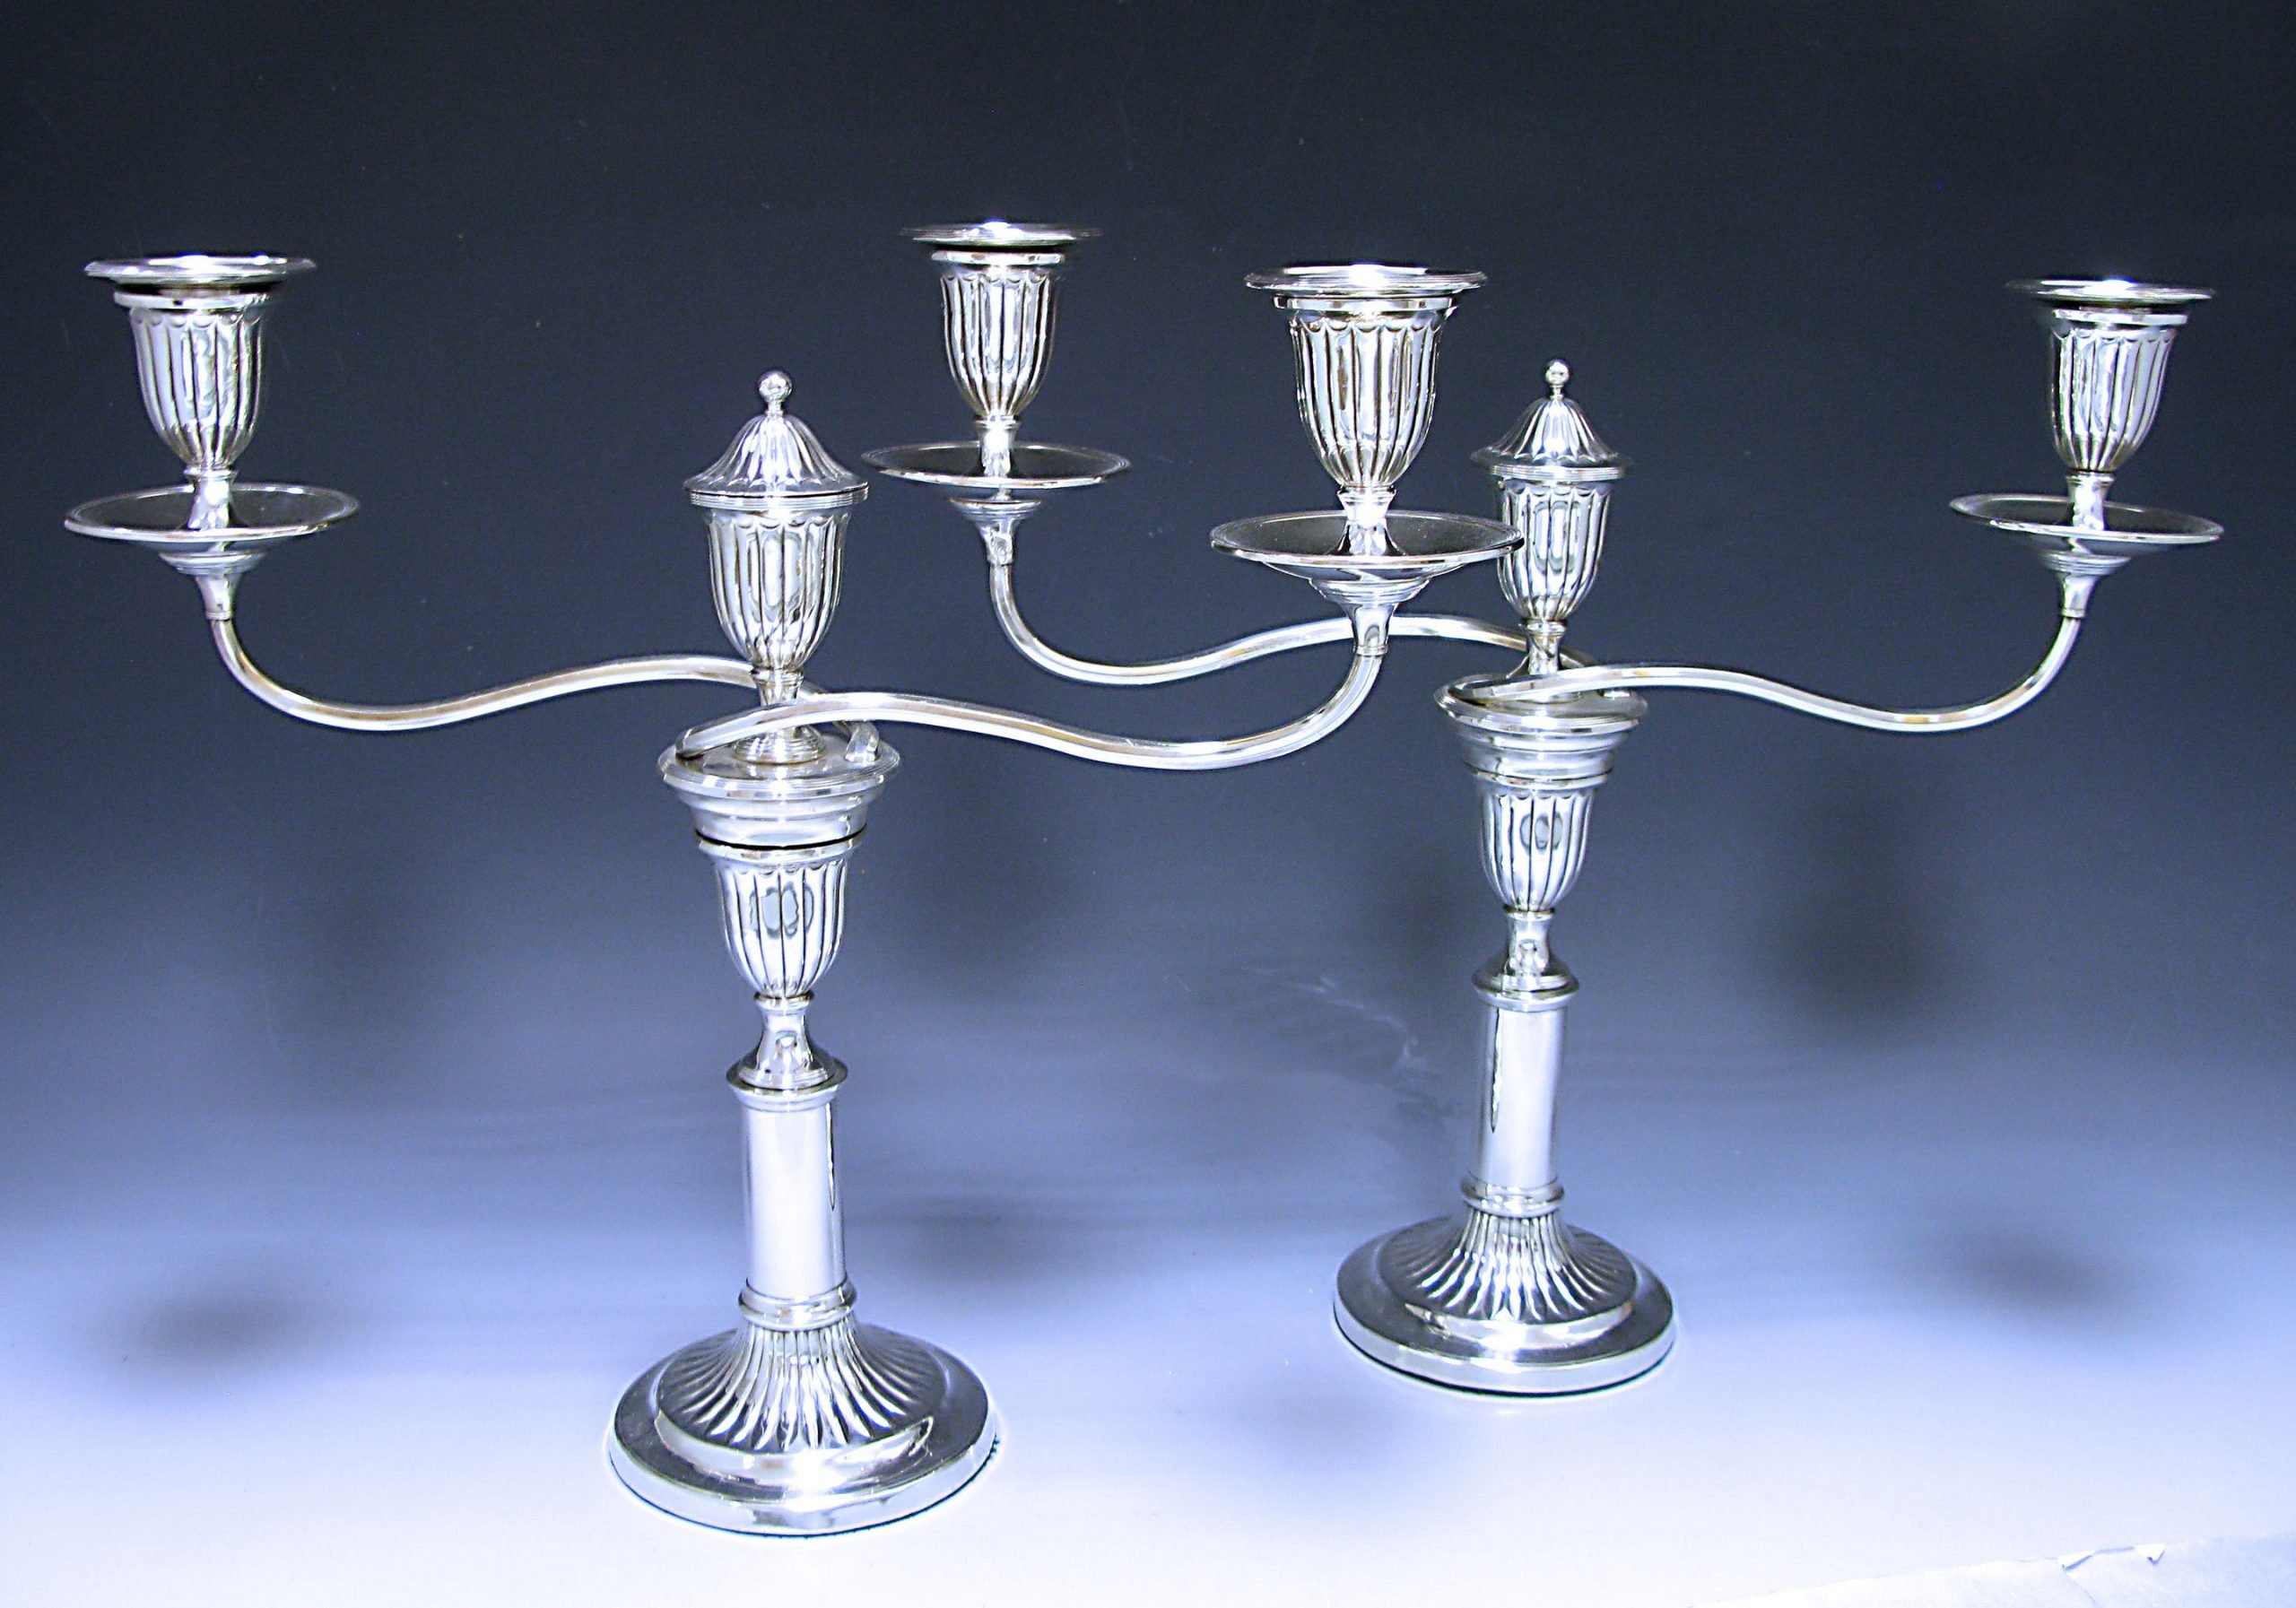 Pair of Old Sheffield Plate Telescopic Candelabra 1